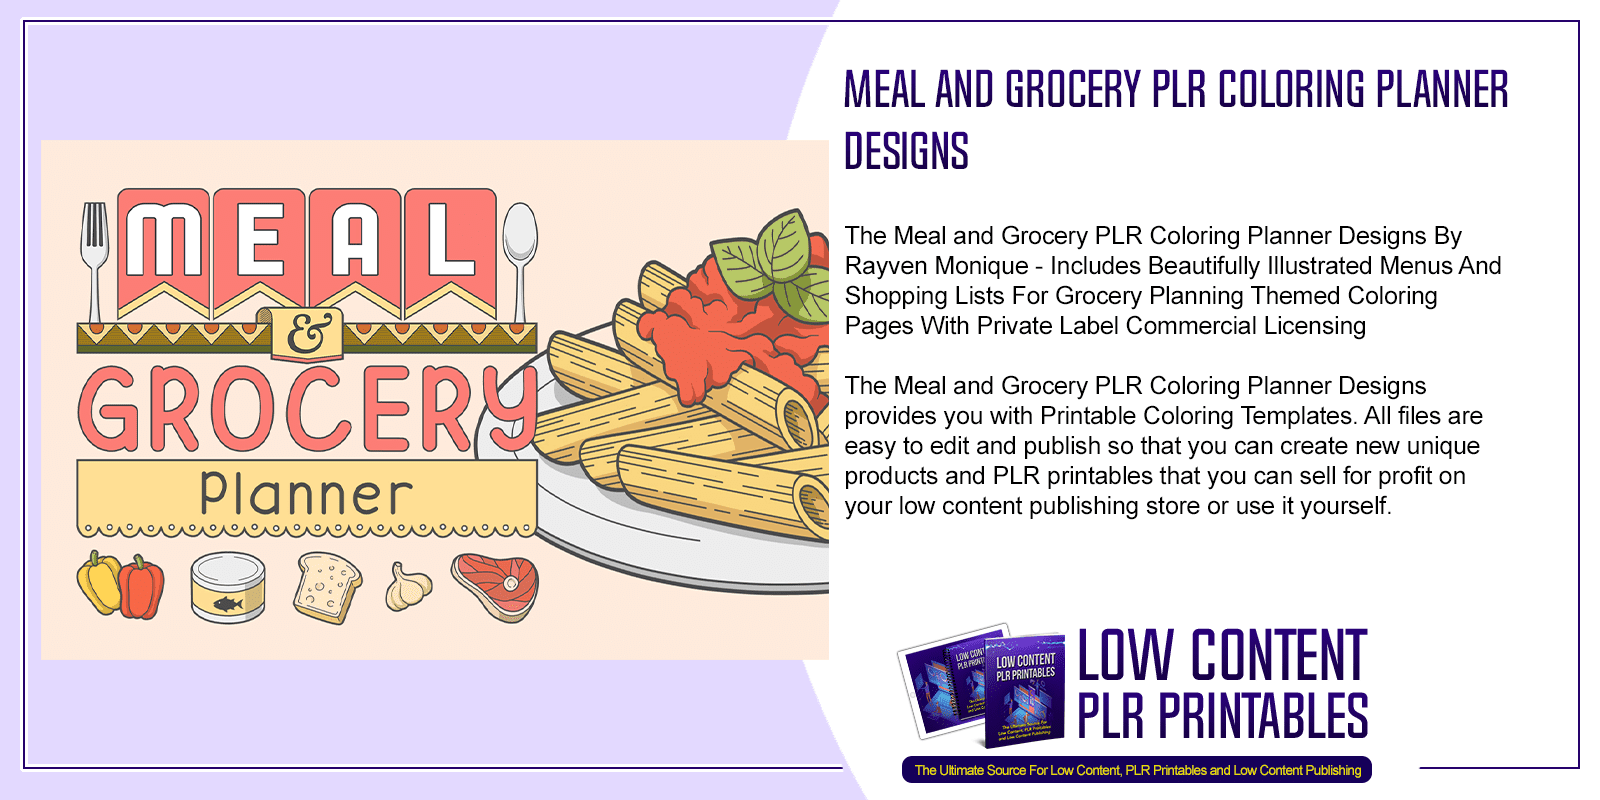 Meal and Grocery PLR Coloring Planner Designs